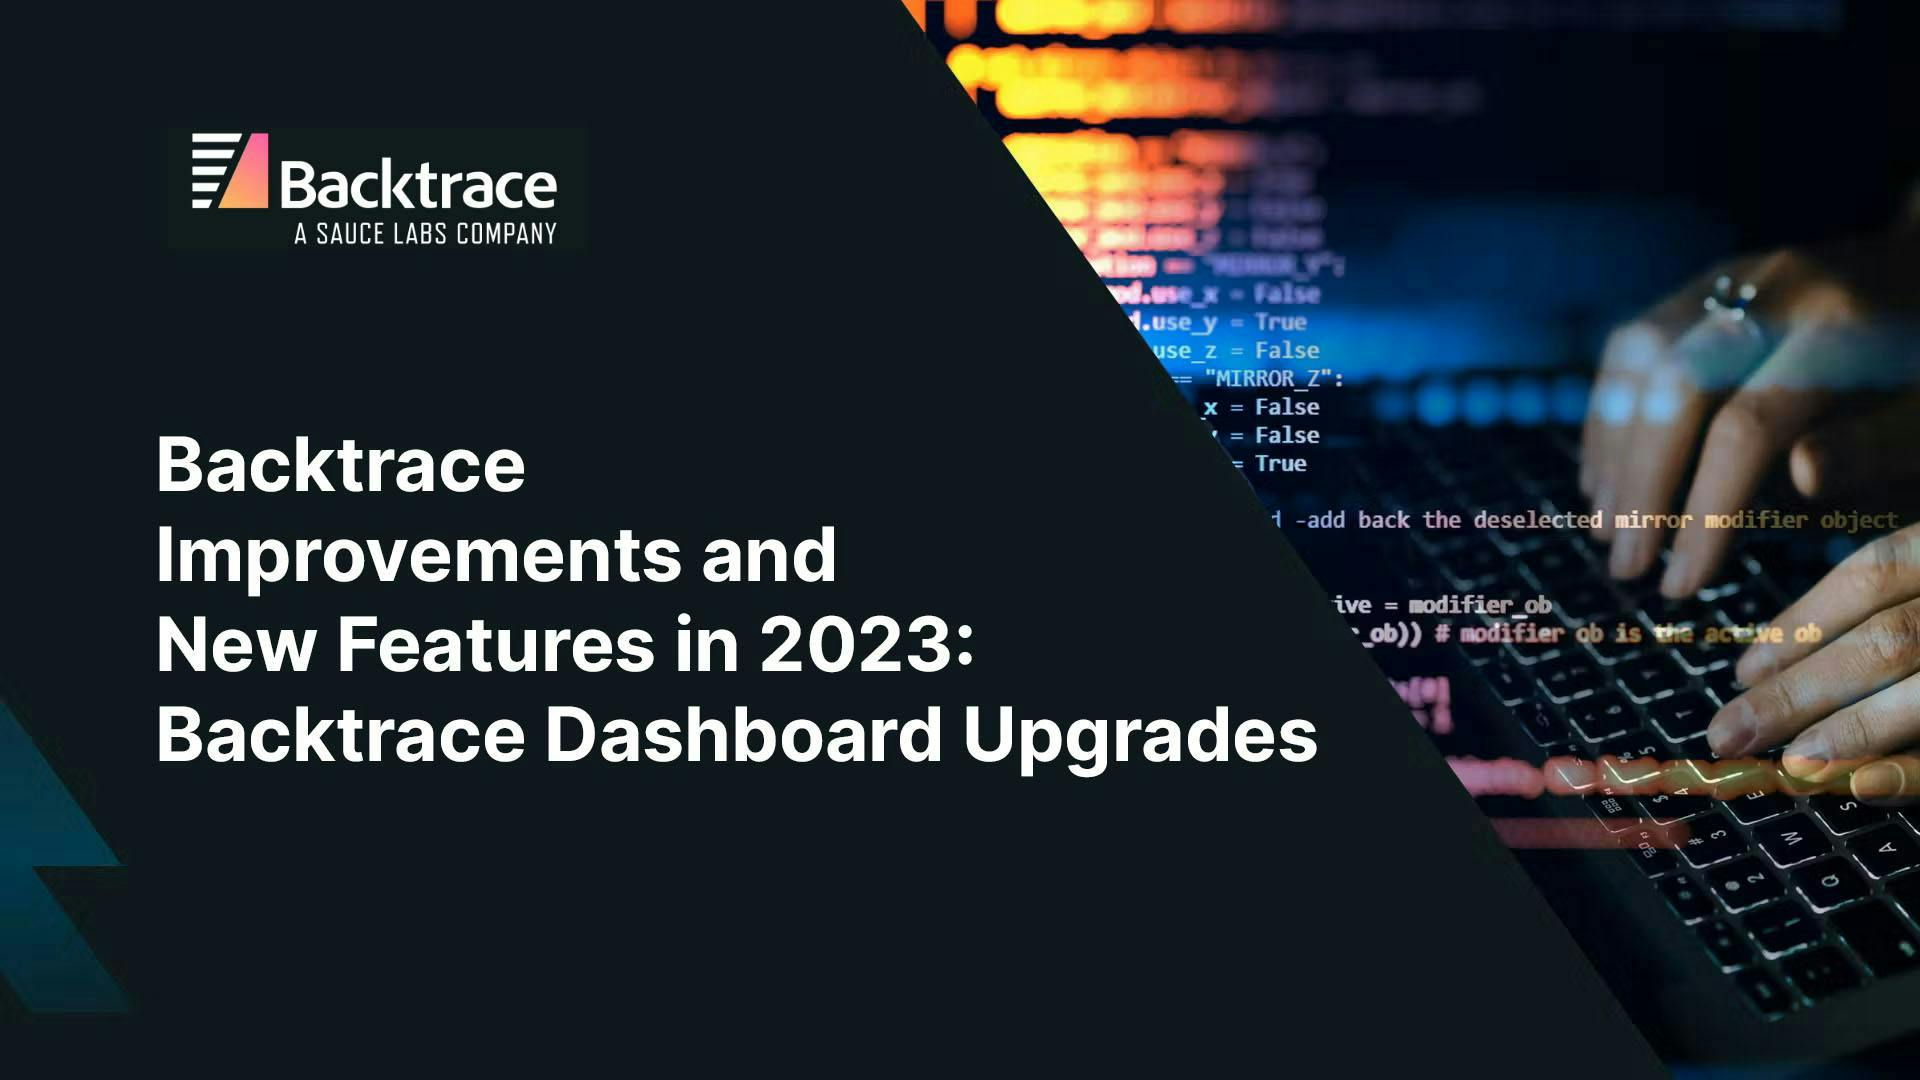 Thumbnail image for blog post: Backtrace Improvements and New Features in 2023: Backtrace Dashboard Upgrades